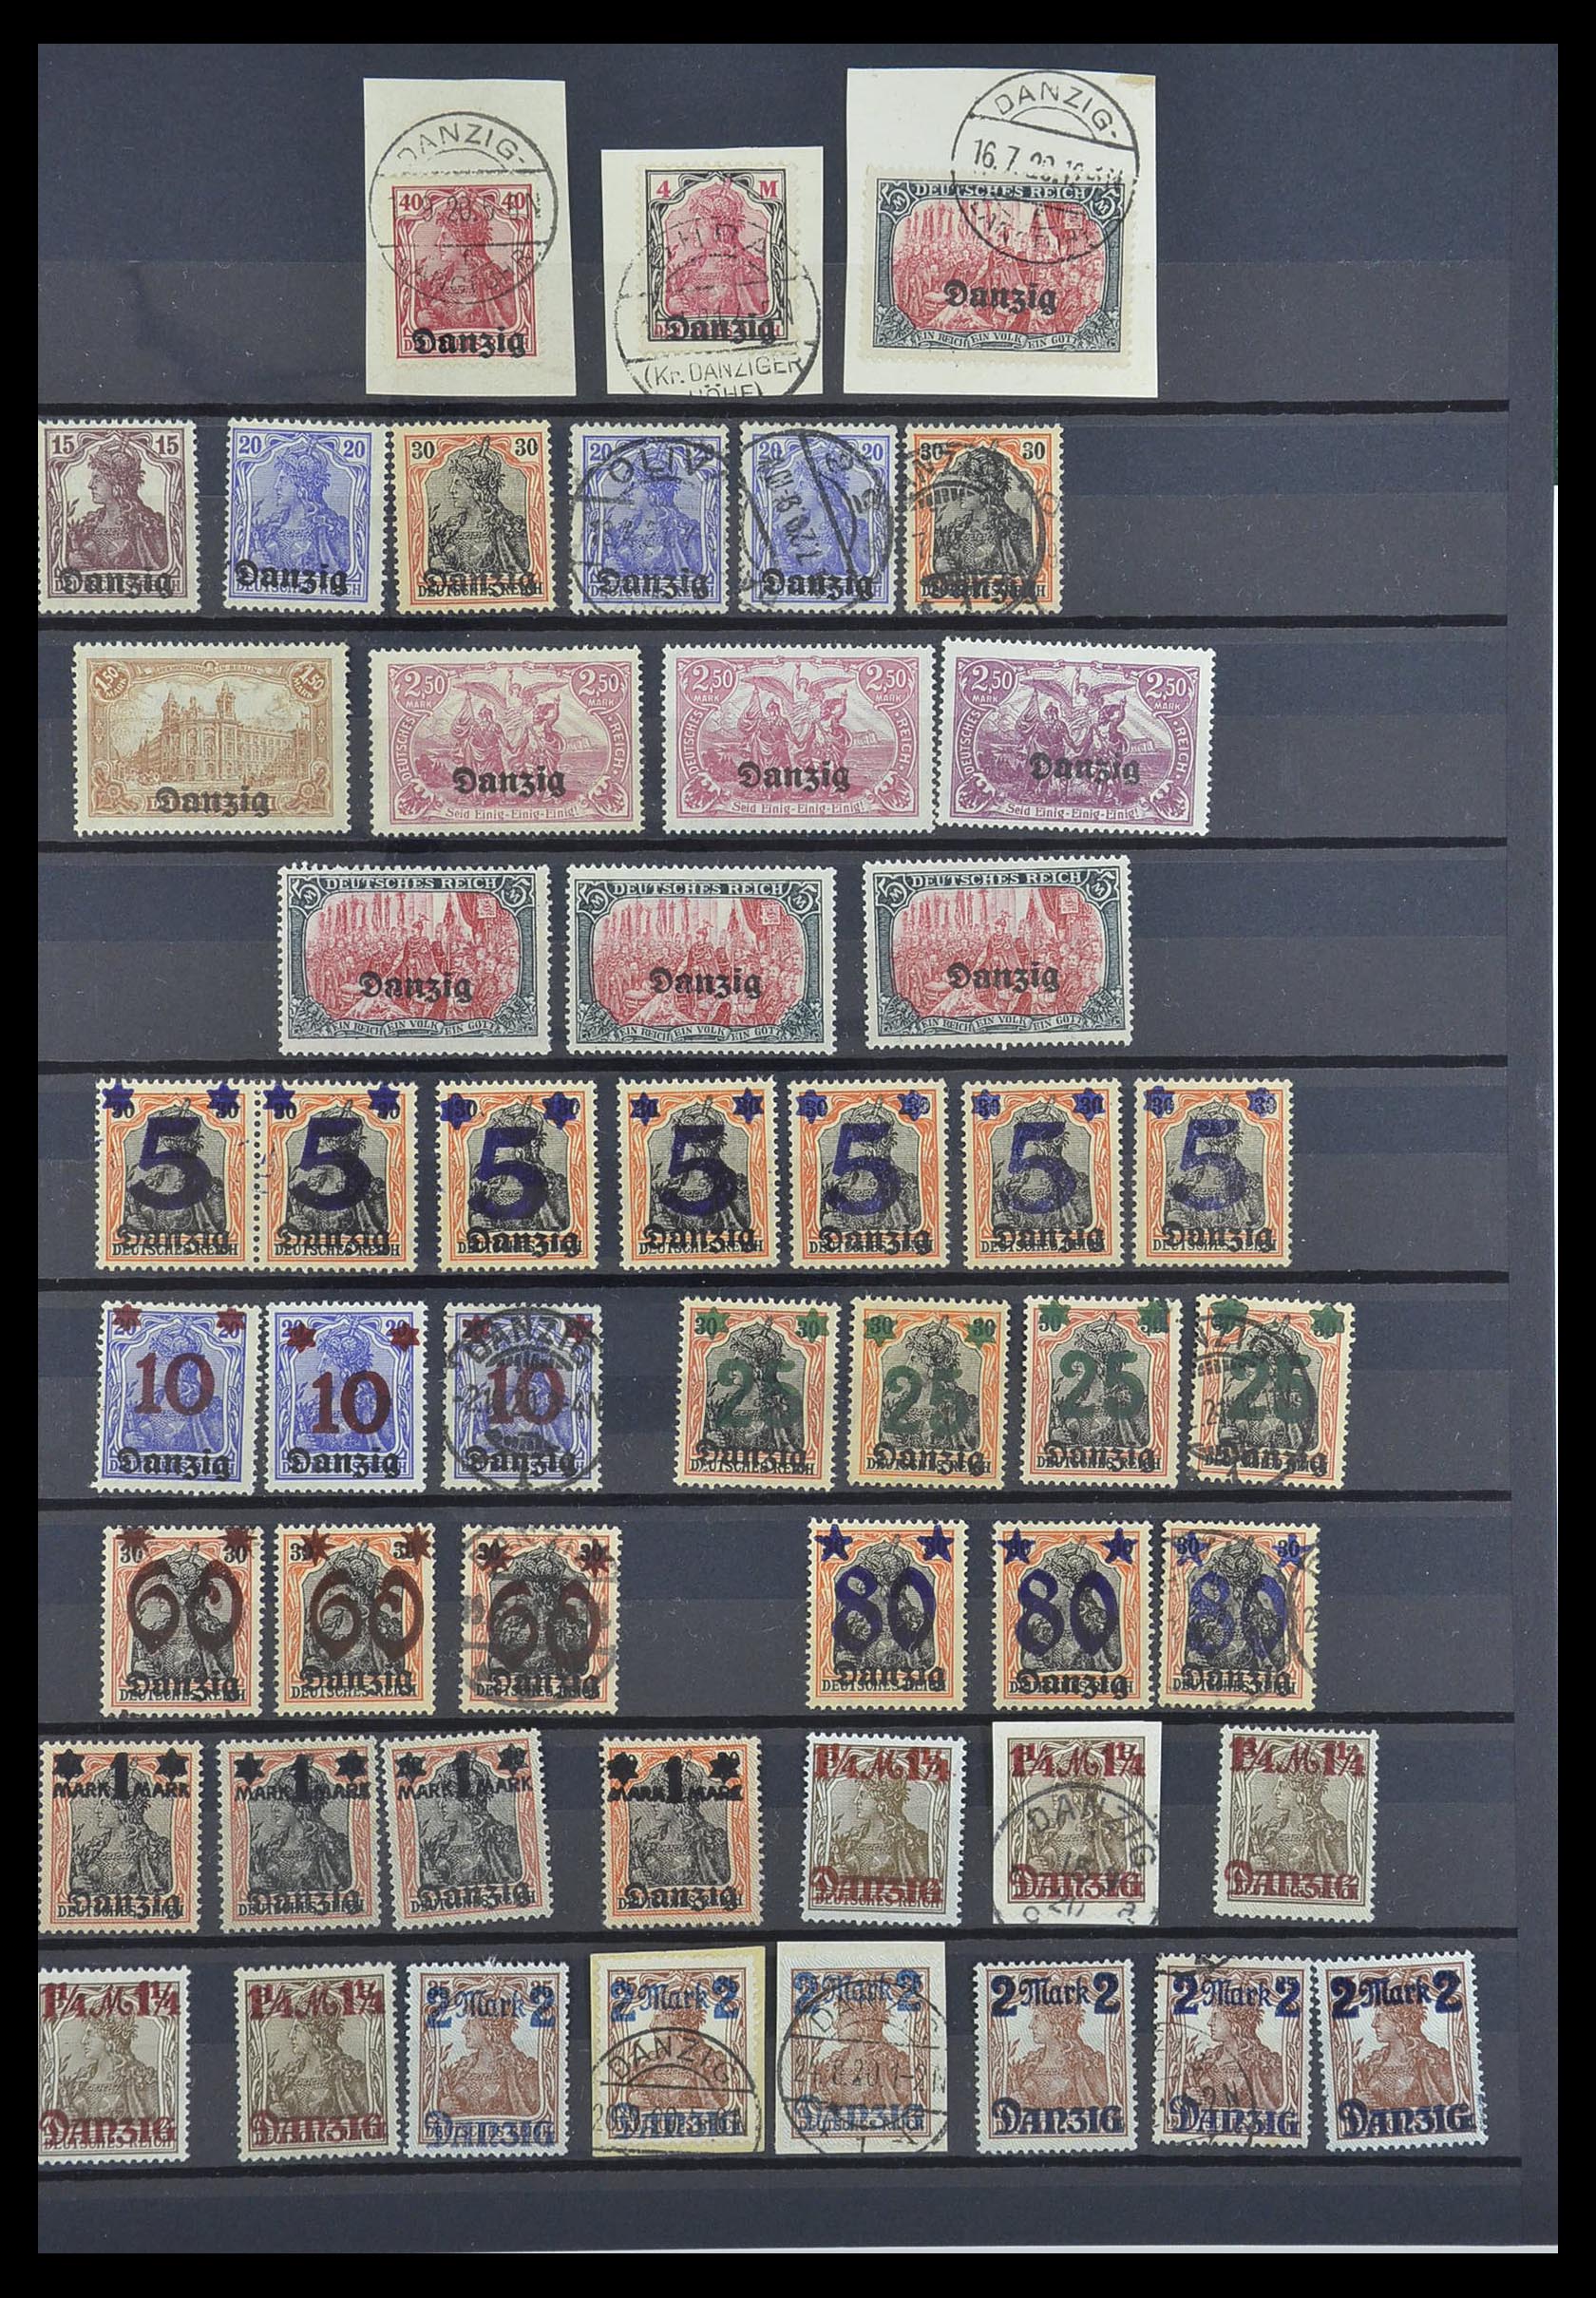 33756 084 - Stamp collection 33756 World classic 1850-1930.